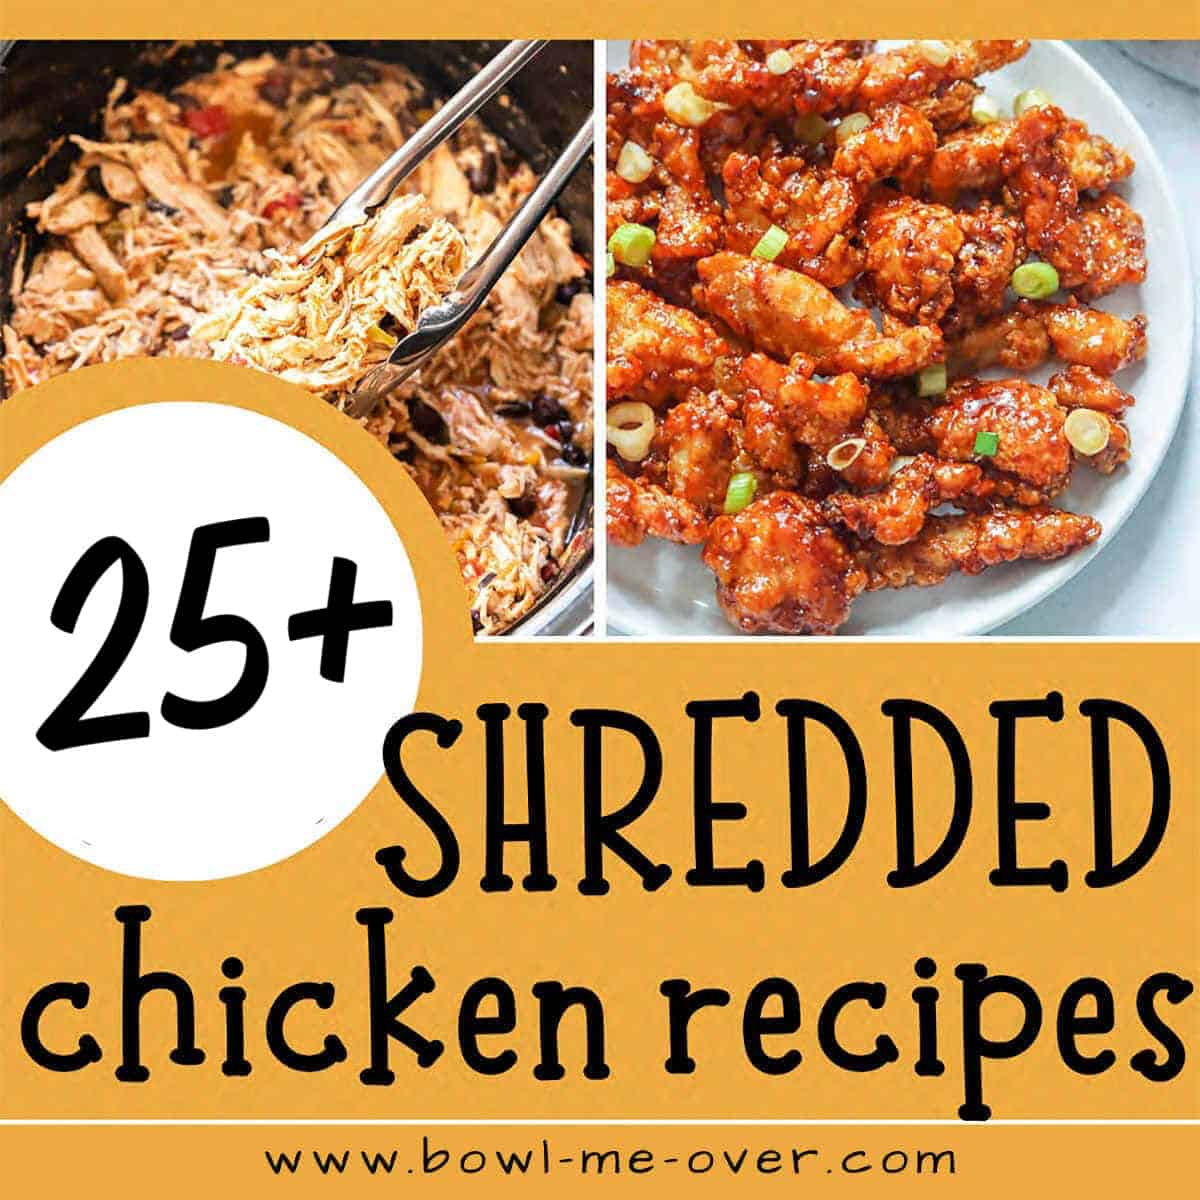 Collage of photos of shredded chicken recipes, with print overlay for social media.